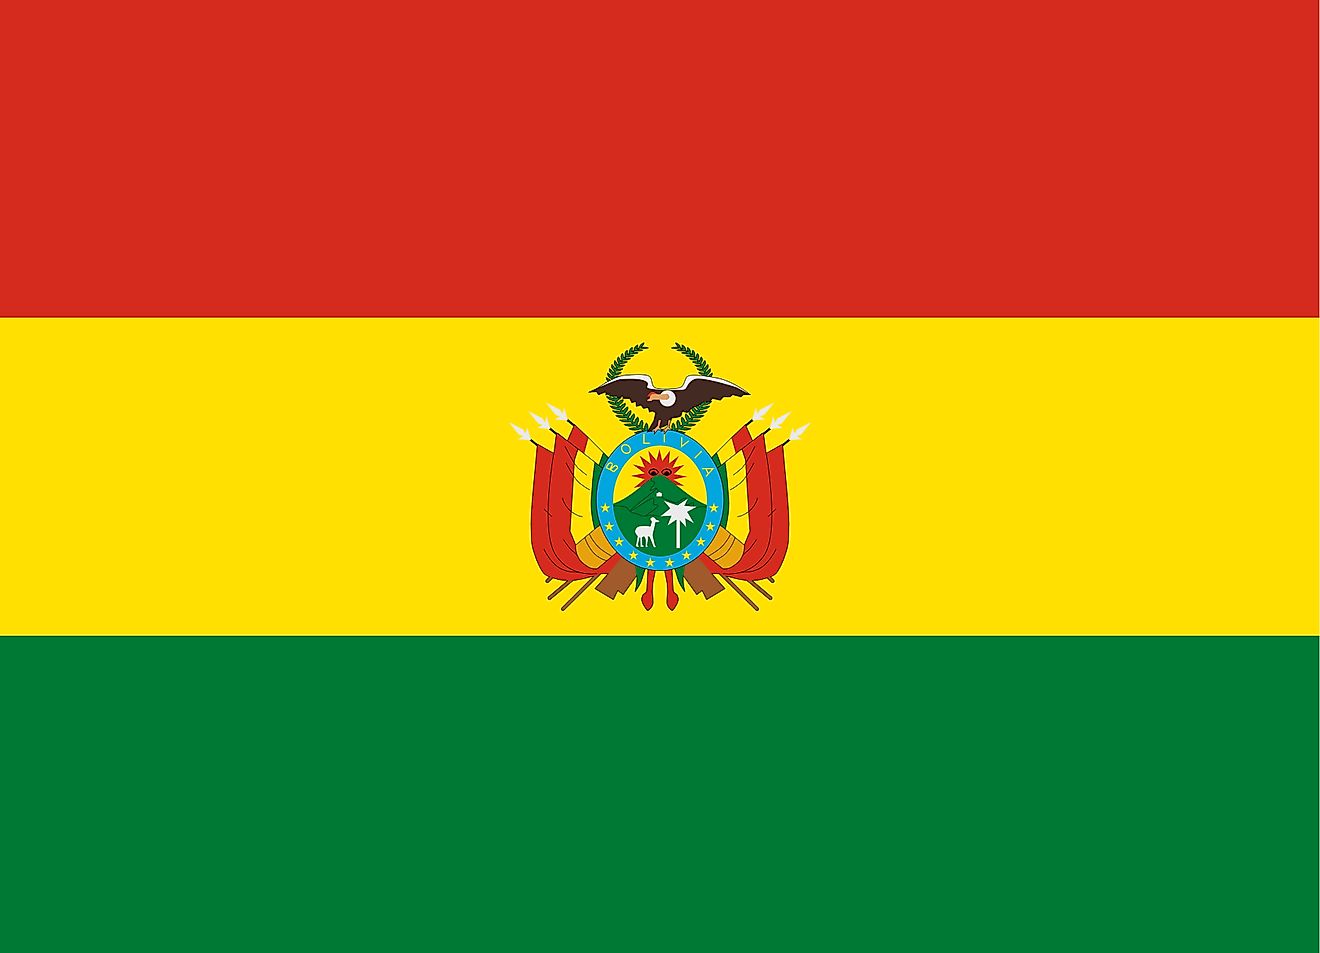 The National Flag of Bolivia with horizontally striped red-yellow-green bands, with the Bolivian Coat of Arms in the central yellow band